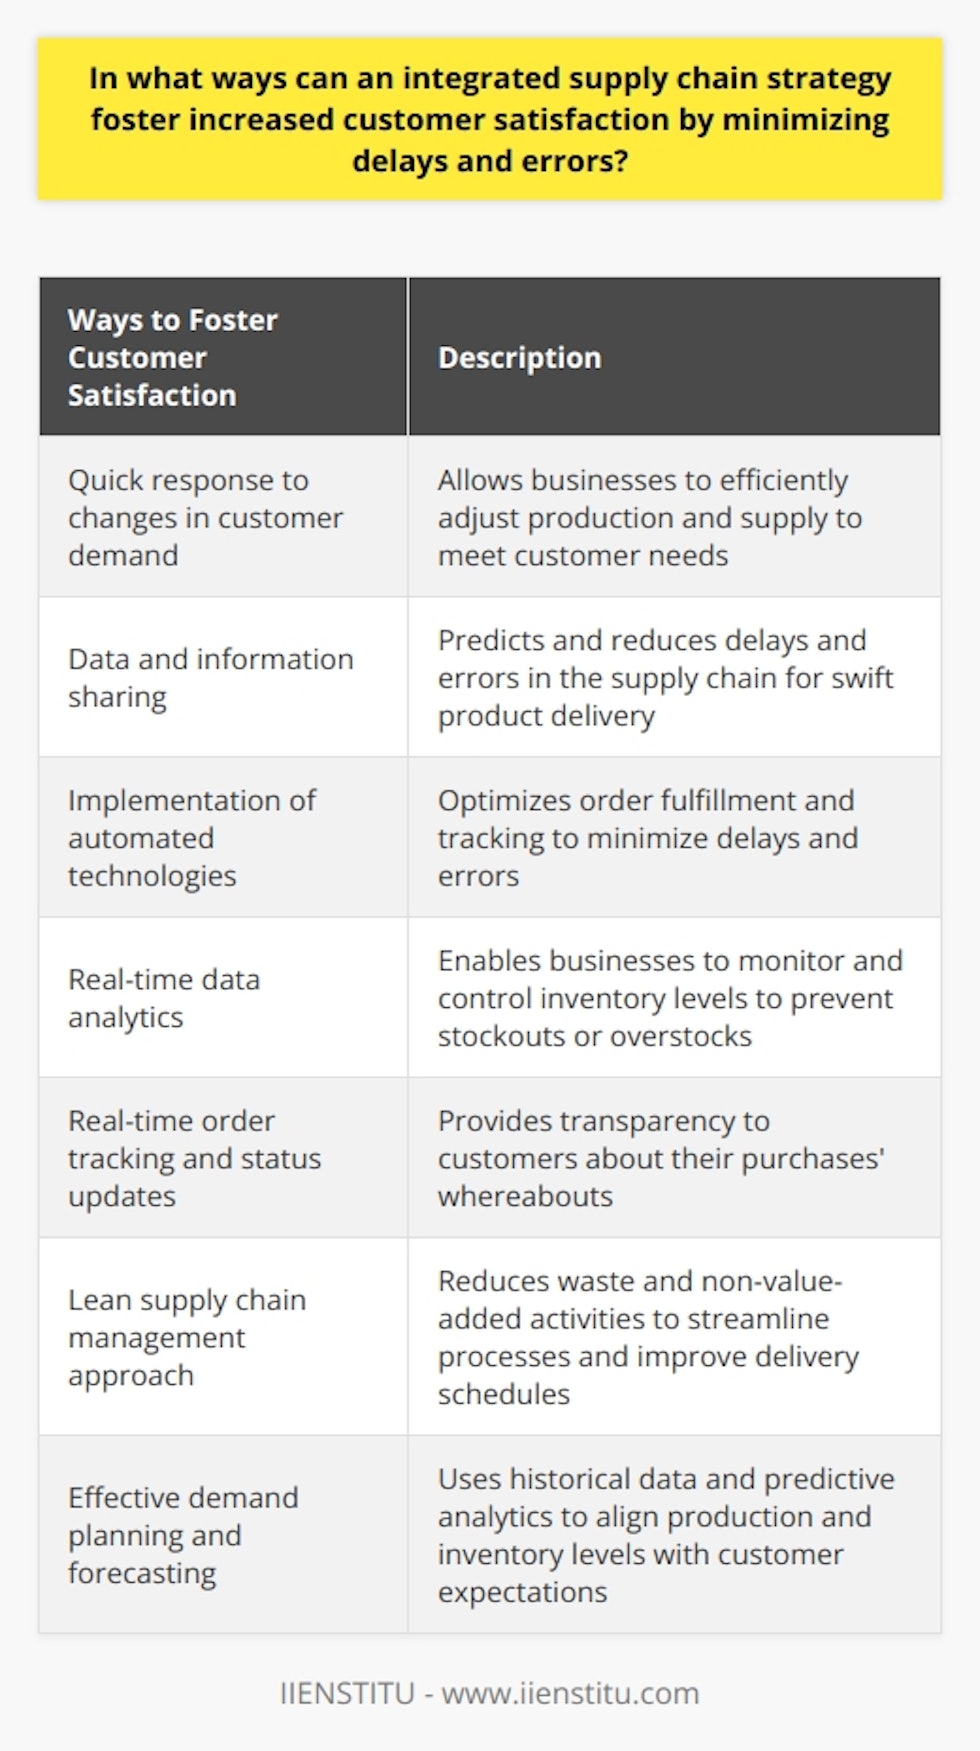 An integrated supply chain strategy allows businesses to respond quickly to changes in customer demand and potential disruptions in the supply chain. By sharing data and information between different departments and stakeholders, businesses can predict and mitigate delays and errors in the supply chain, resulting in swift product delivery with minimal errors.The implementation of automated technologies and real-time data analytics is crucial in optimizing order fulfillment and tracking. By monitoring and controlling inventory levels in real-time, businesses can reduce instances of stockouts or overstocks, which directly impact customer satisfaction. Real-time order tracking and status updates provide transparency in the supply chain, enabling customers to stay informed about the whereabouts of their purchases.A lean supply chain management approach, focused on reducing waste and non-value-added activities, is also essential in an integrated strategy. By streamlining processes and reducing turnaround times, businesses can ensure reliable delivery schedules and higher levels of customer satisfaction. Lean principles aim to maximize value for customers by minimizing the time from order placement to product delivery.Additionally, effective demand planning and forecasting play a significant role in an integrated supply chain strategy. By leveraging historical data, market trends, and predictive analytics, businesses can create accurate demand forecasts, align production and inventory levels with customer expectations, and efficiently allocate resources. This reduces order processing errors and ensures that the right products are available to customers when needed.In conclusion, an integrated supply chain strategy that incorporates cross-functional collaboration, technological advancements, lean management principles, and effective demand planning is key to fostering increased customer satisfaction. By minimizing delays and errors in the supply chain, businesses can deliver products swiftly and maximize overall value for customers.